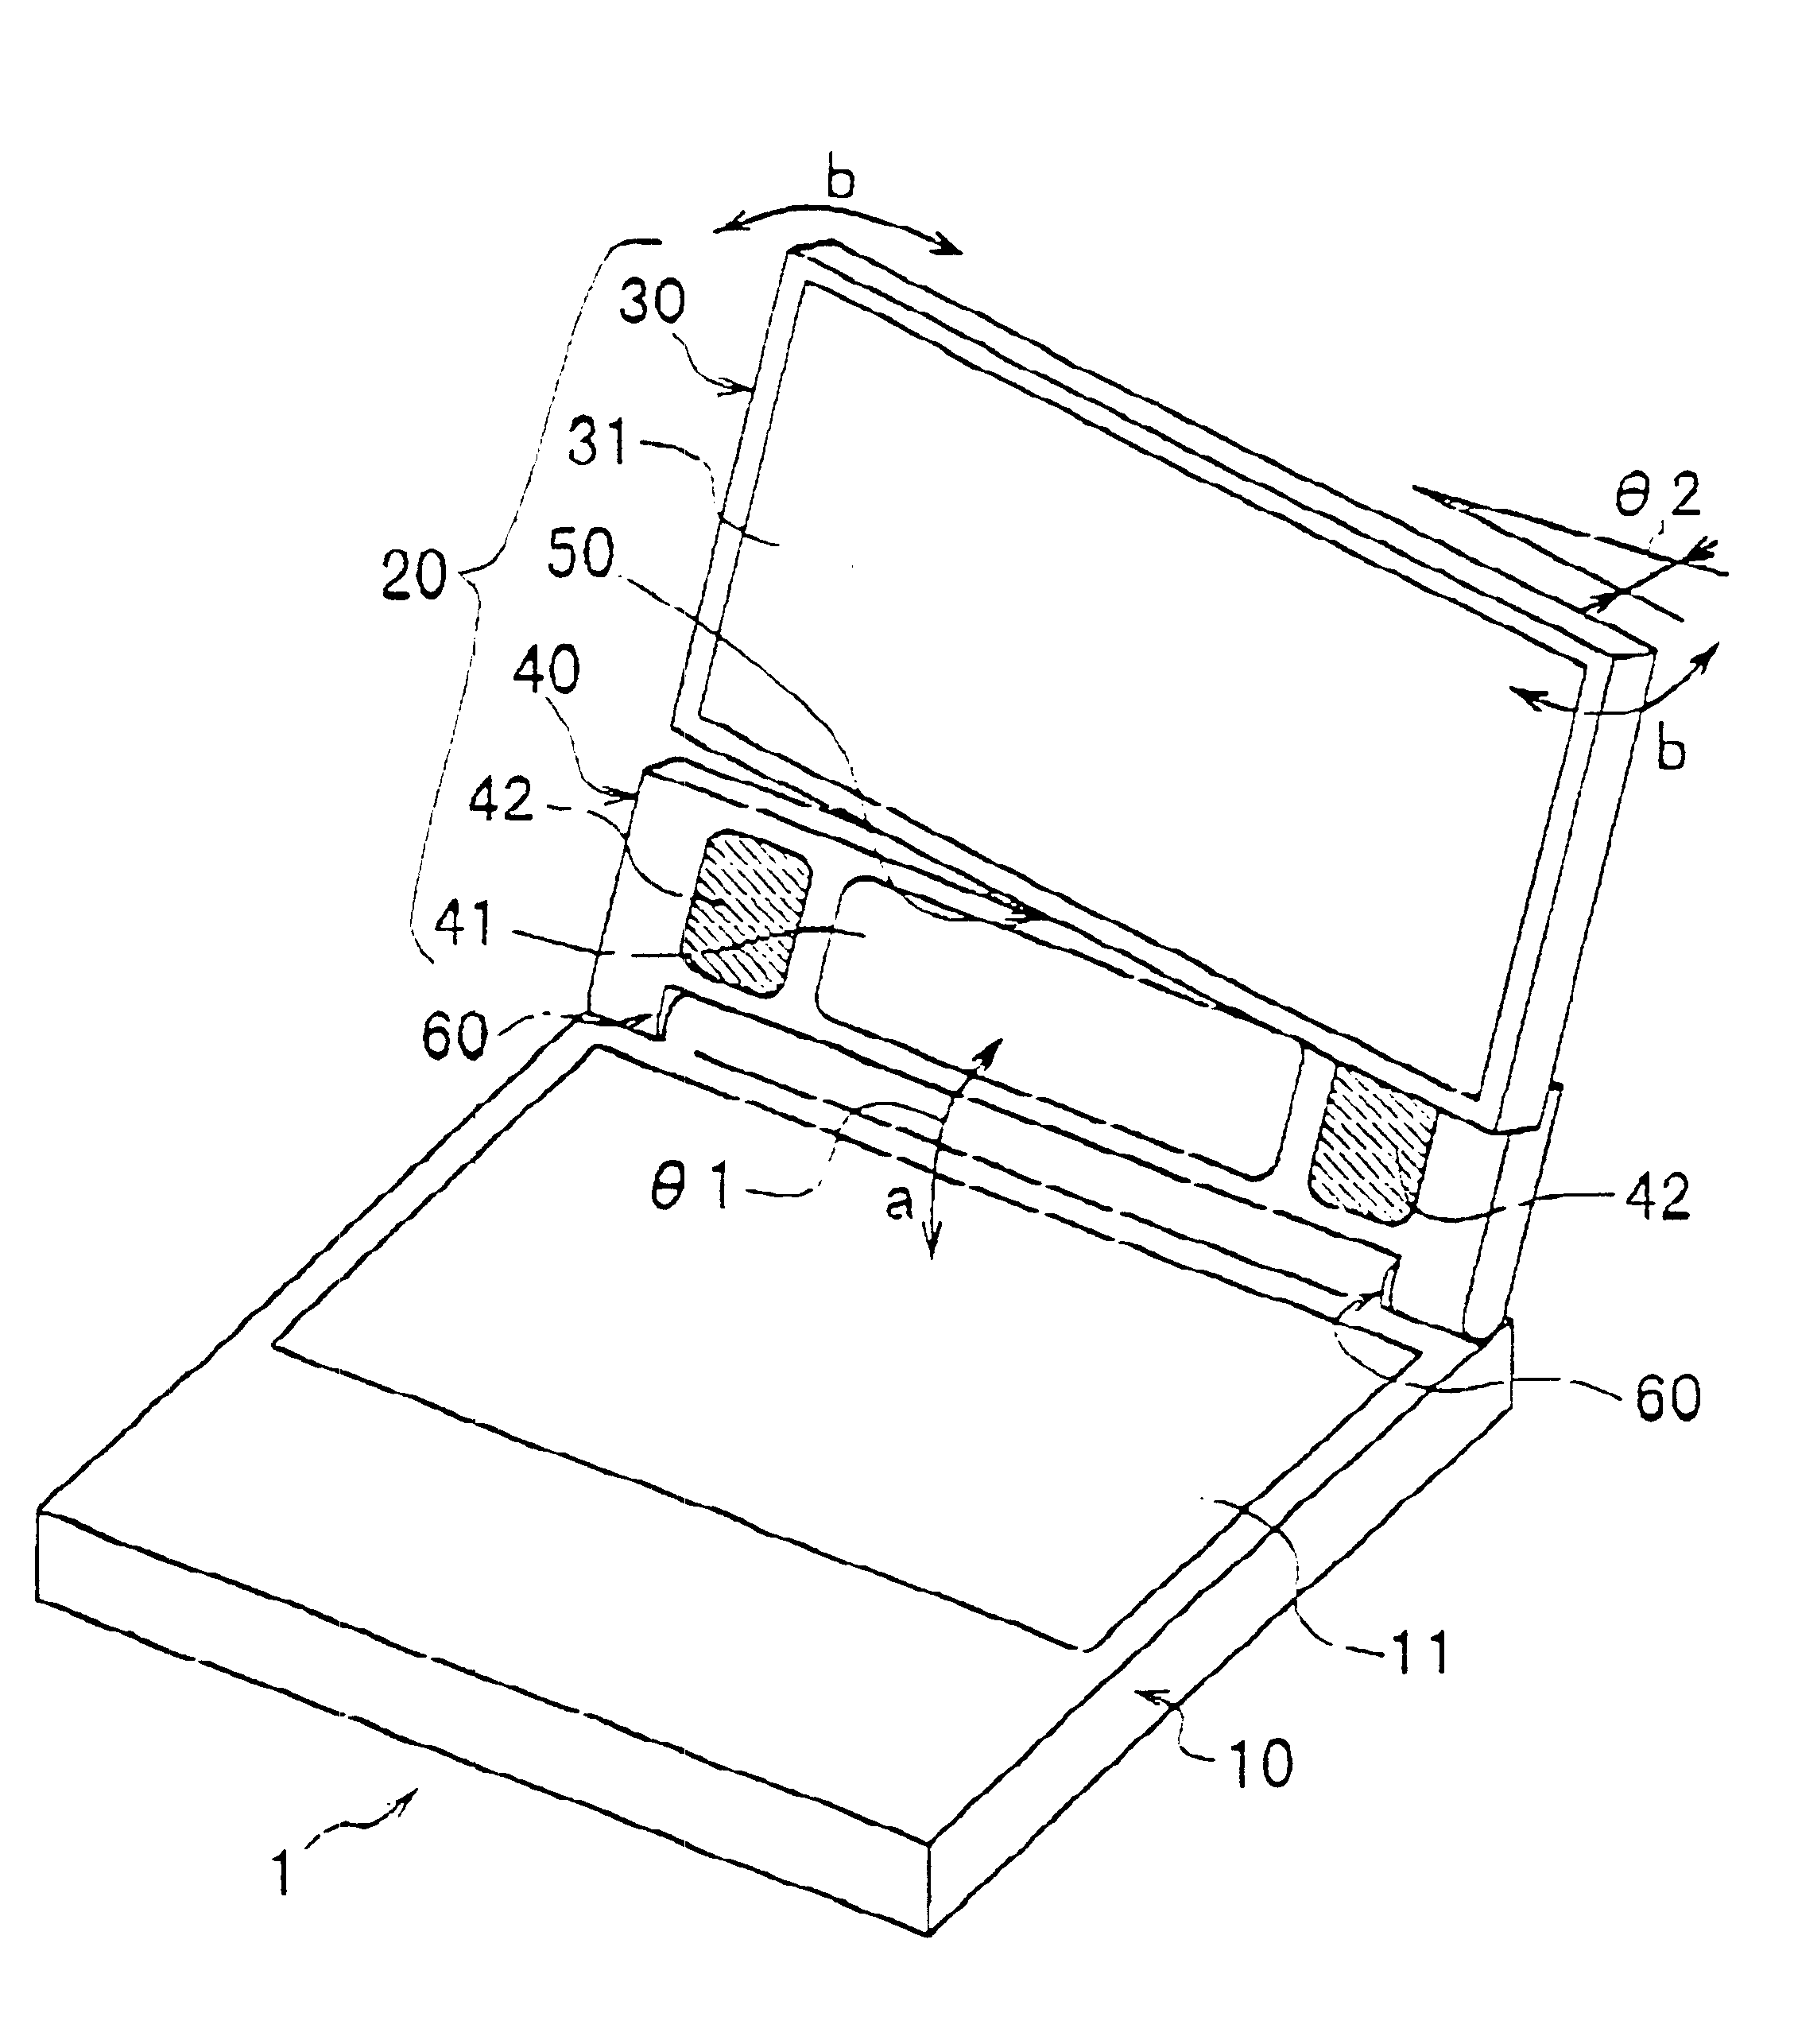 Portable computer system with adjustable display subsystem